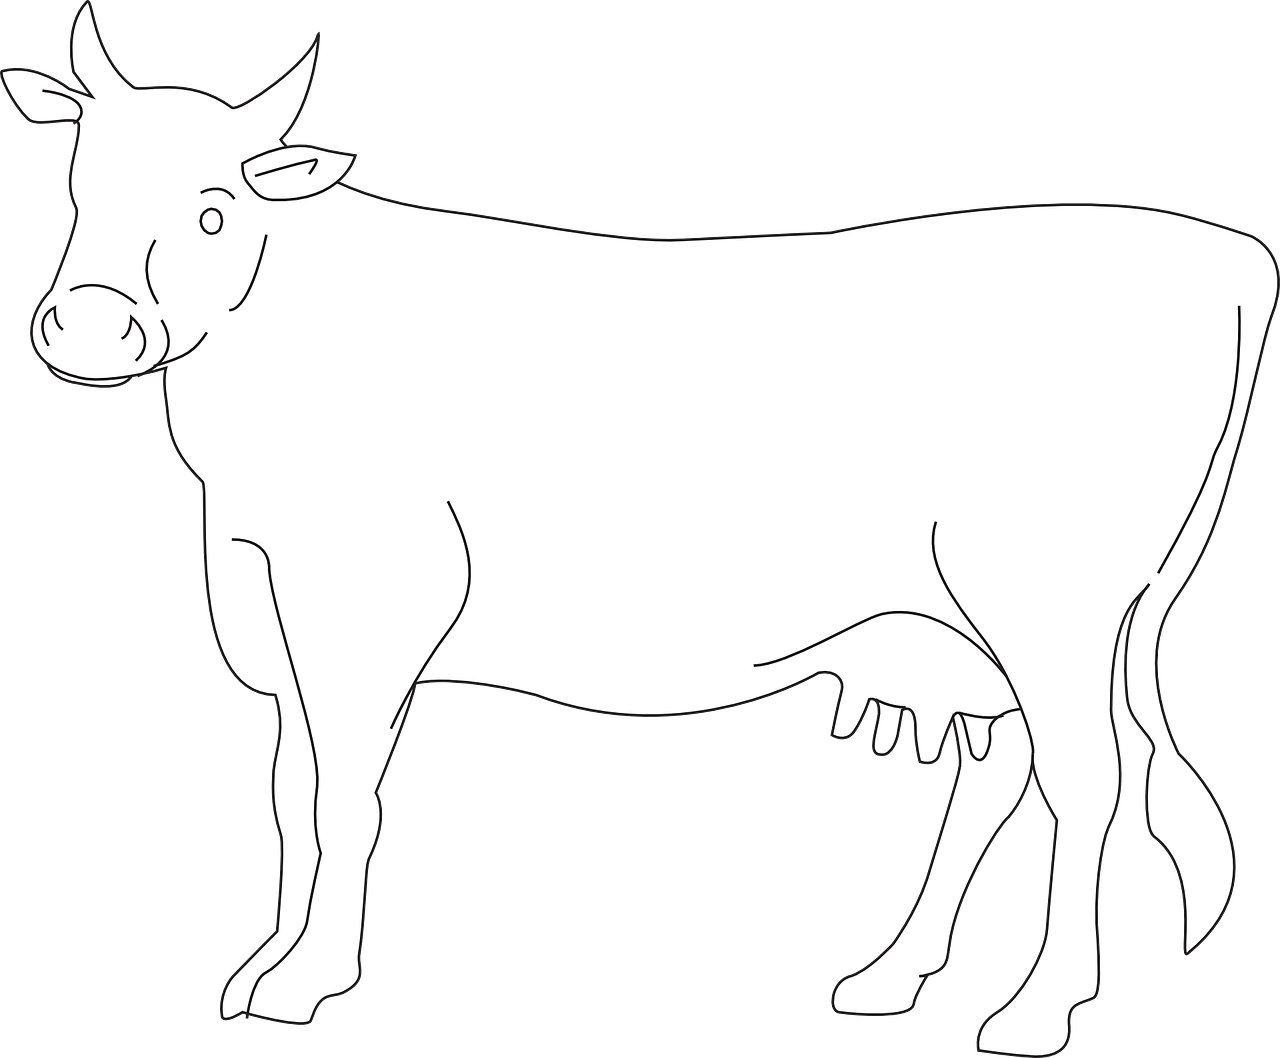 Outlined Dairy Cow Illustration